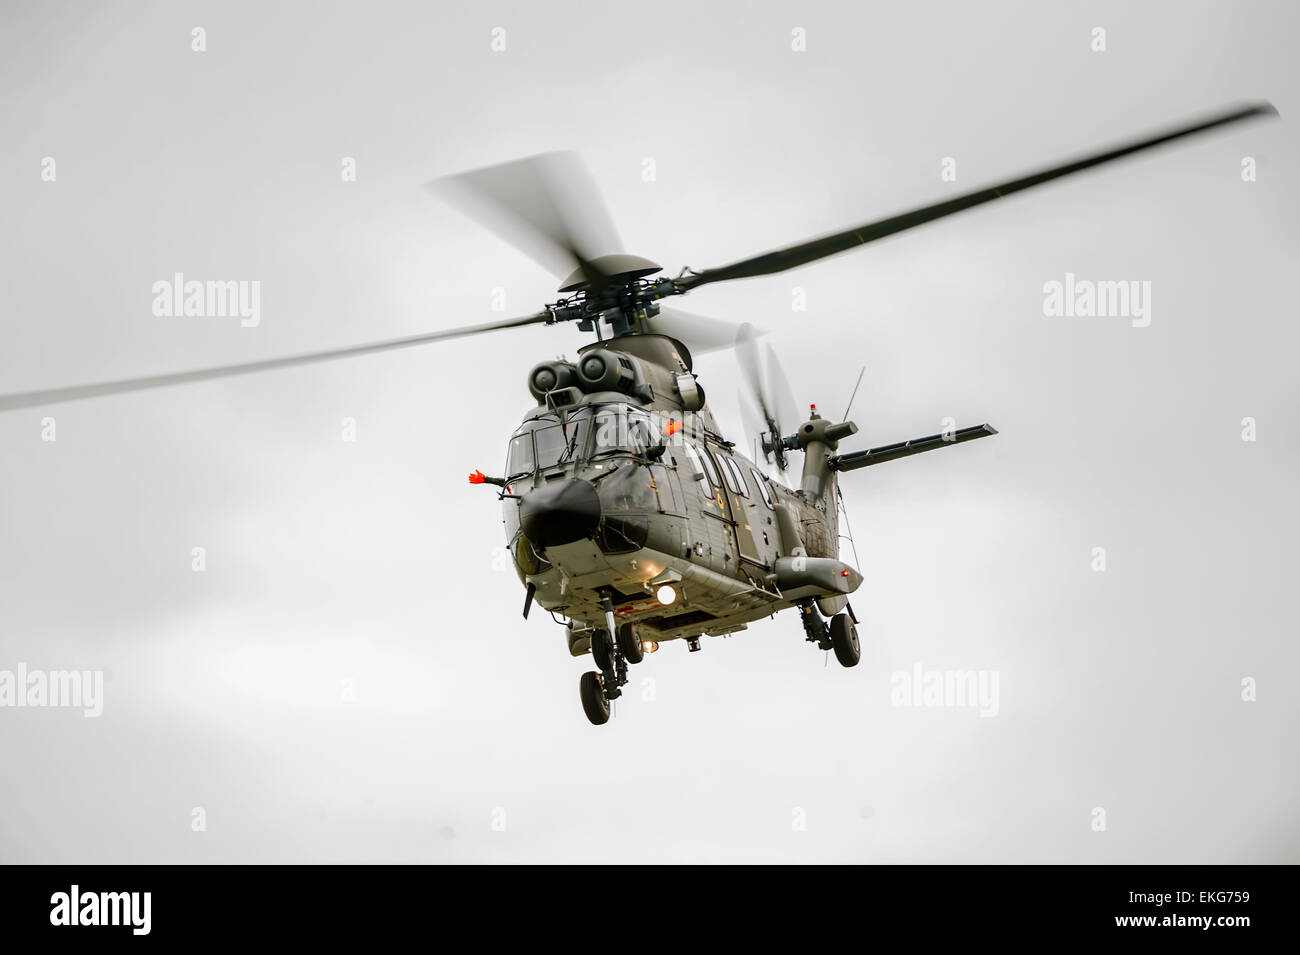 Swiss Air Force AS332M1 Super Puma transport helicopter Stock Photo